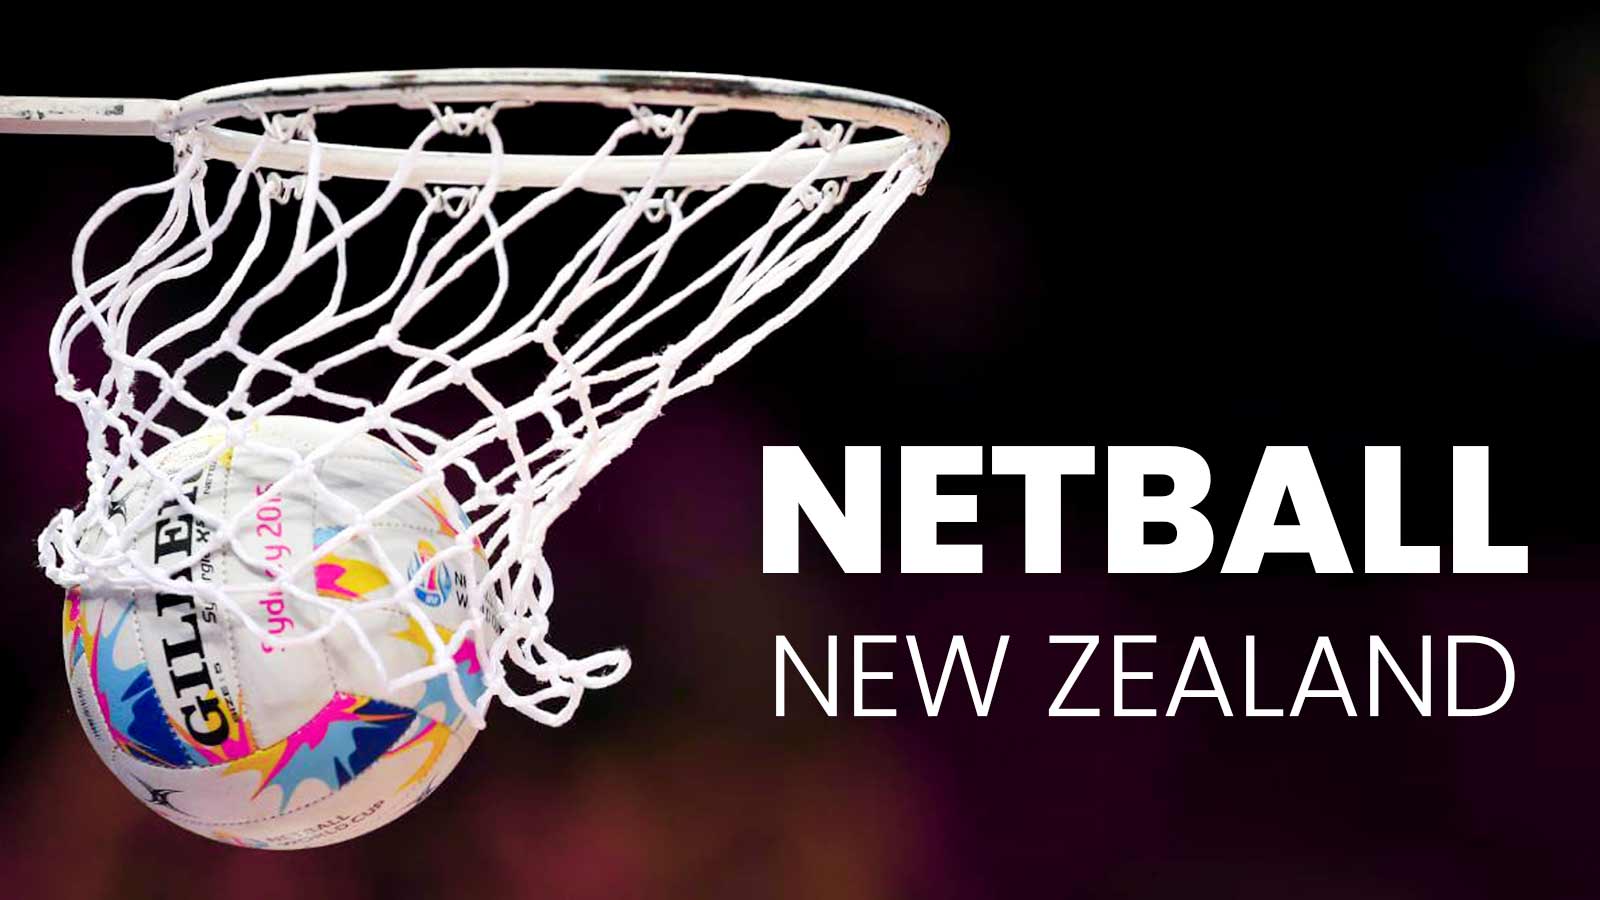 The NZ Netball Team Yesterday, Today, and Tomorrow